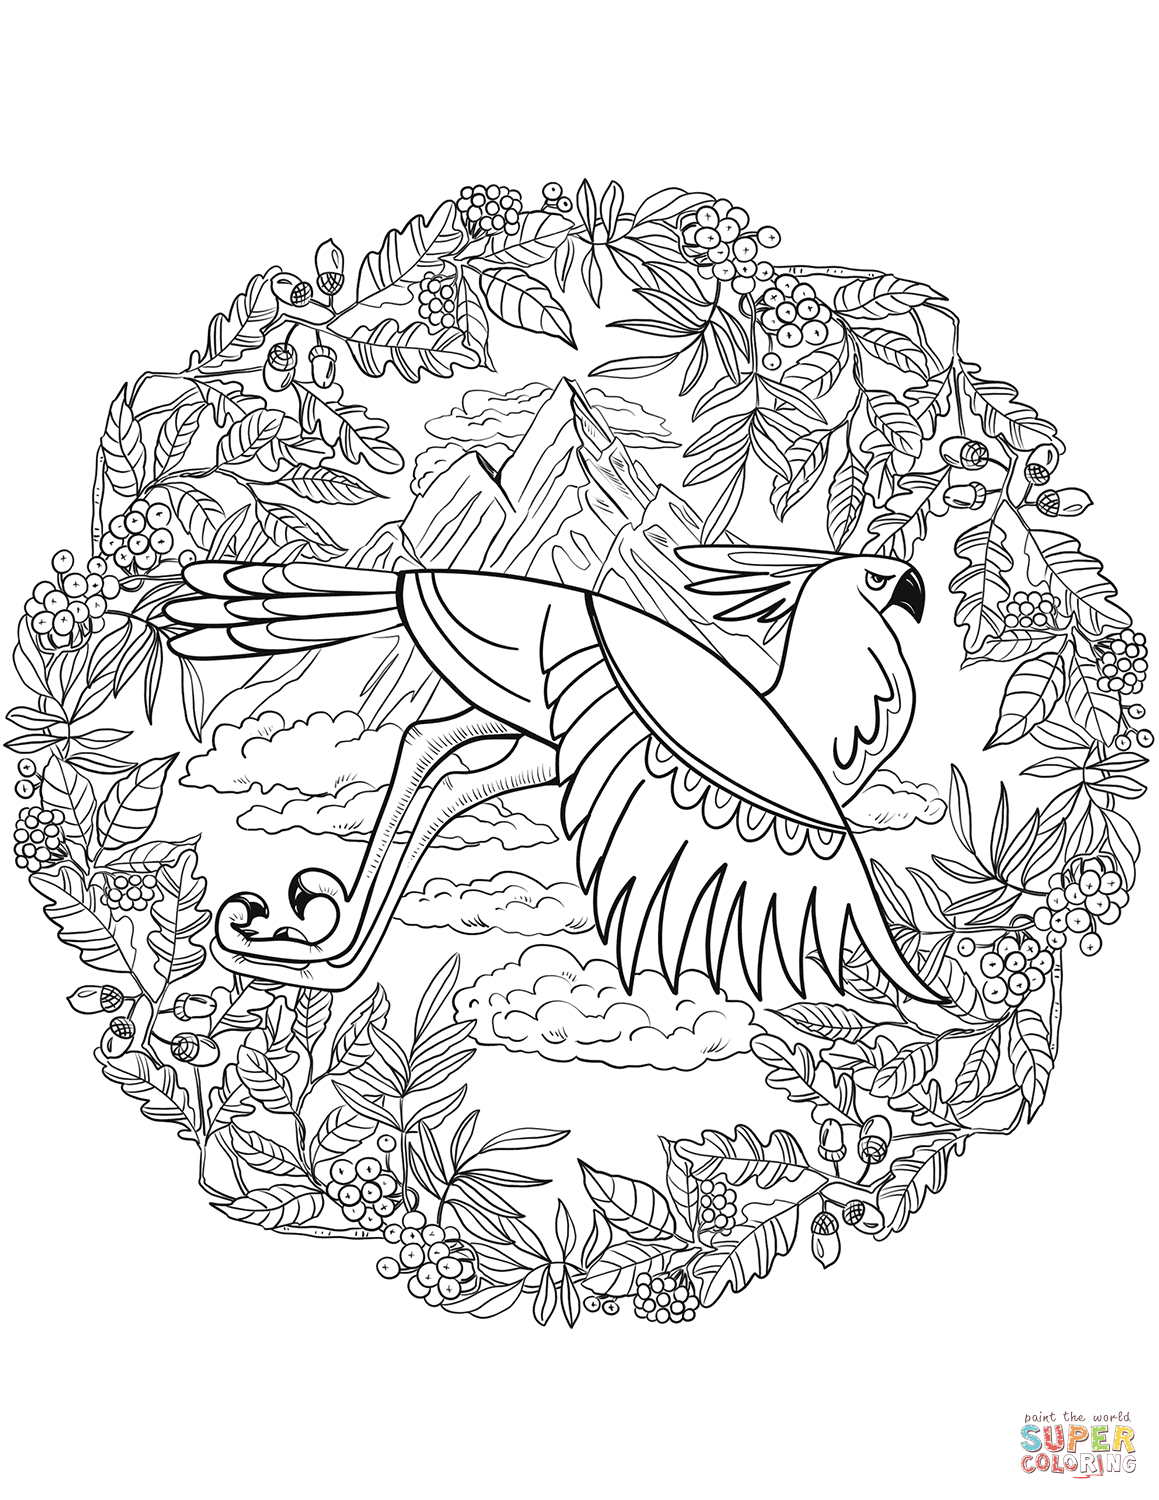 Mandala Color Pages Animal Mandalas Coloring Pages Free Coloring Pages